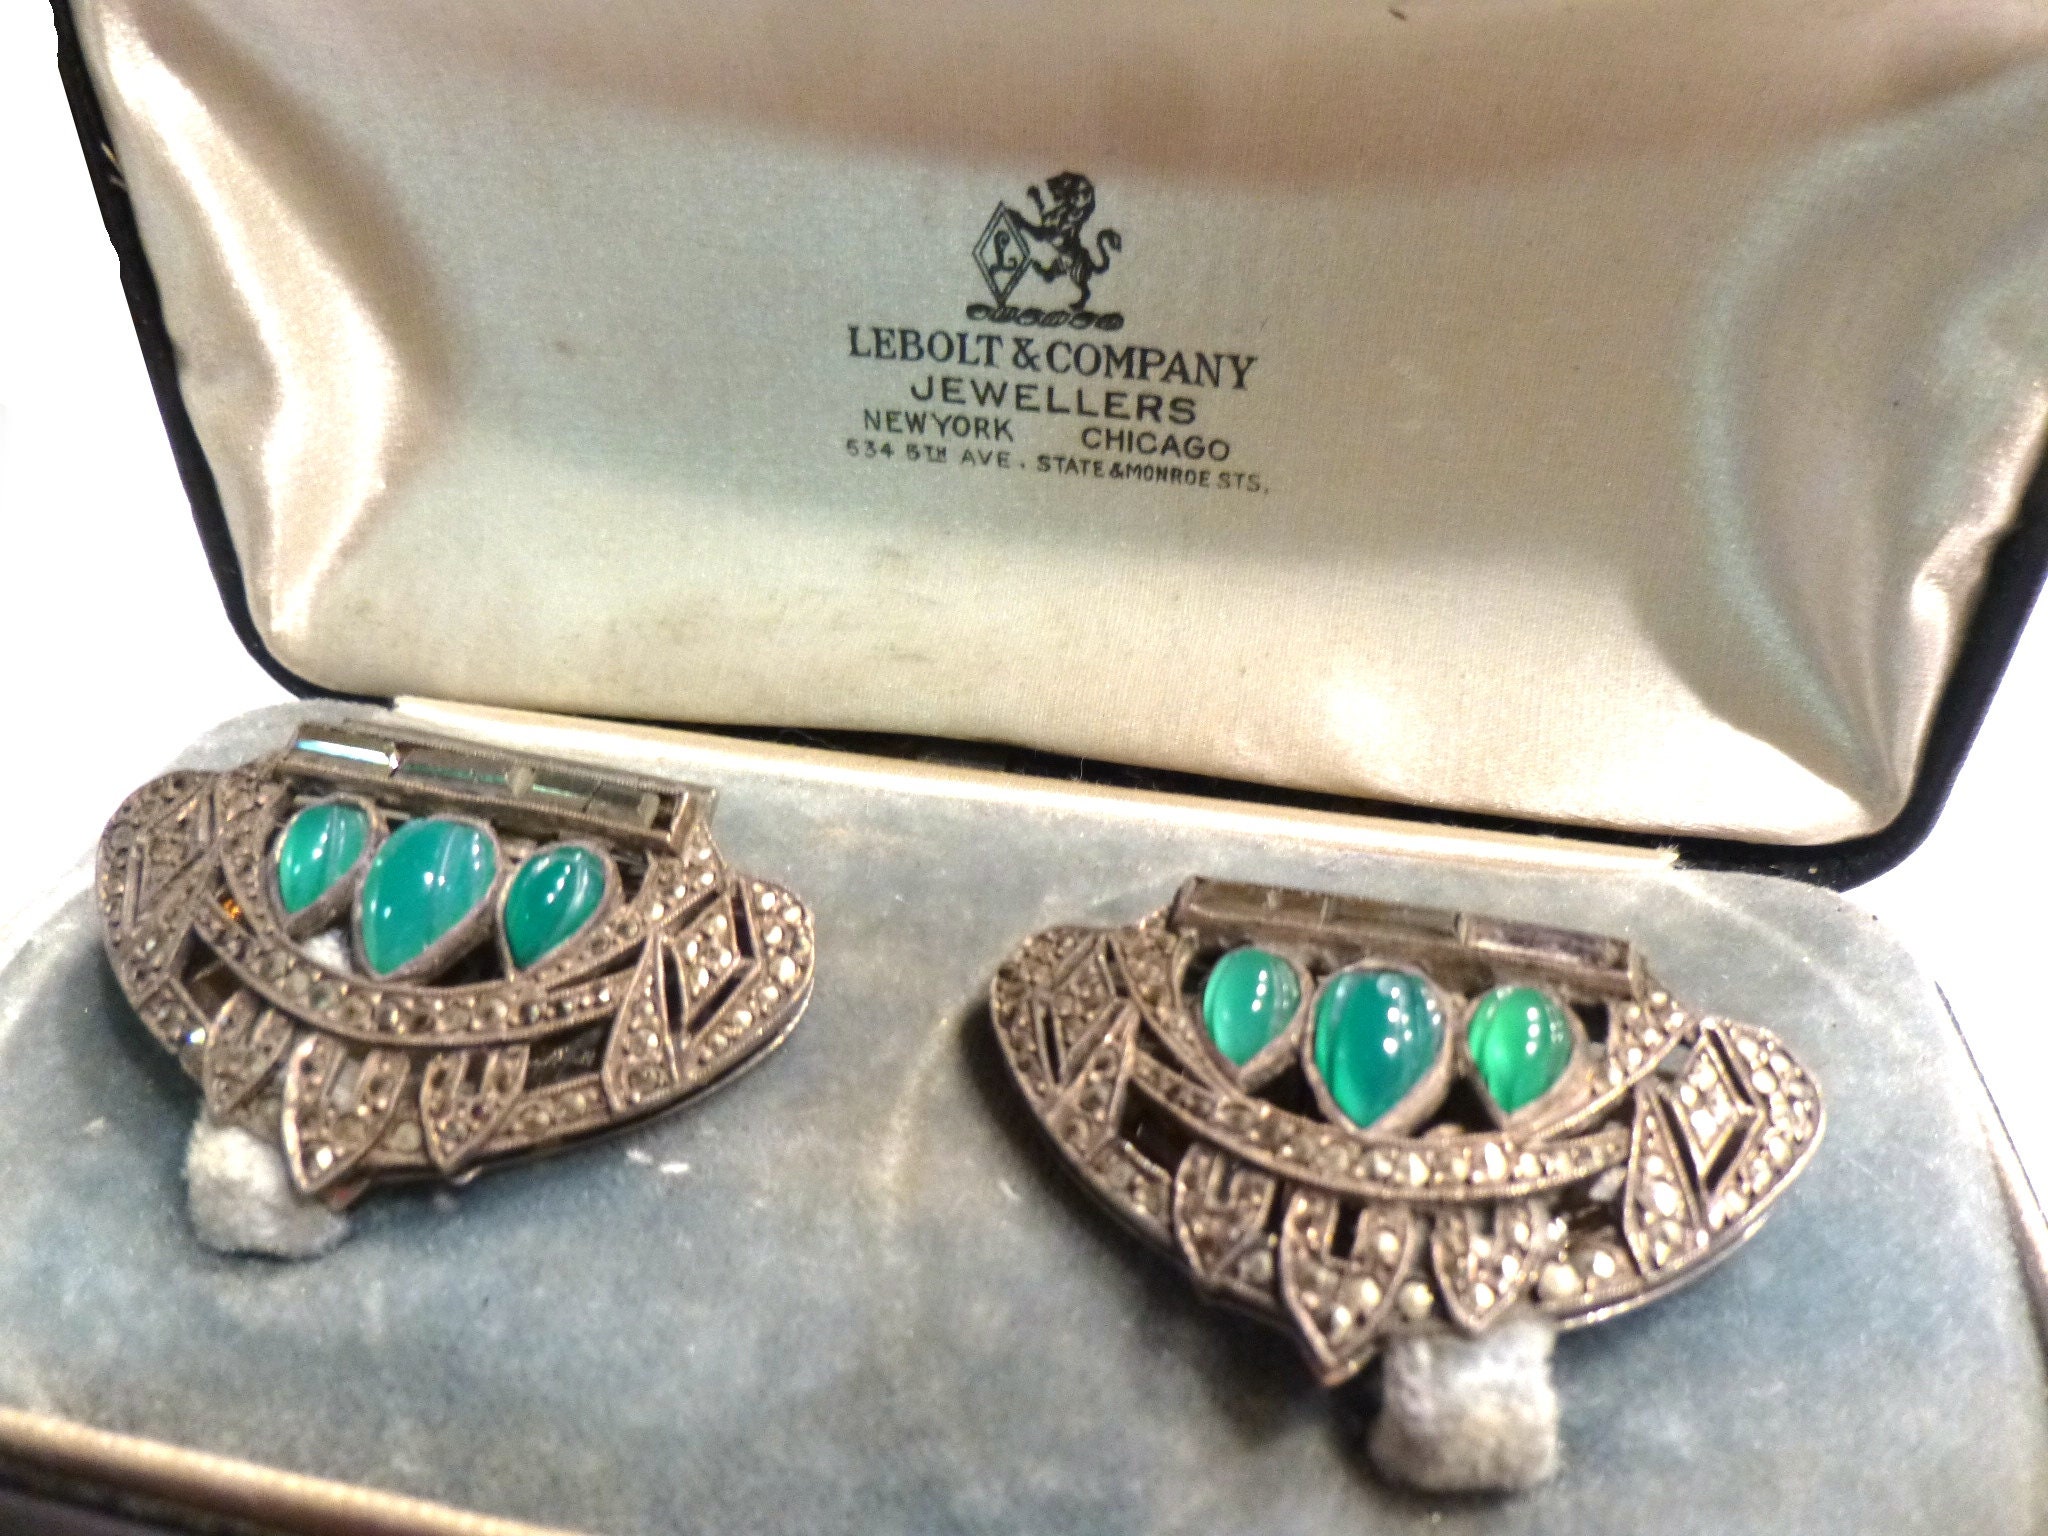 ? Vintage Made in Paris France 1930s French Art Deco Silver & Marcasite Shoe Clips Pair Greens Stones Chrysoprase In Chicago LeBolt Box. pins en clips Kleding- & schoenclips Sieraden Broches 